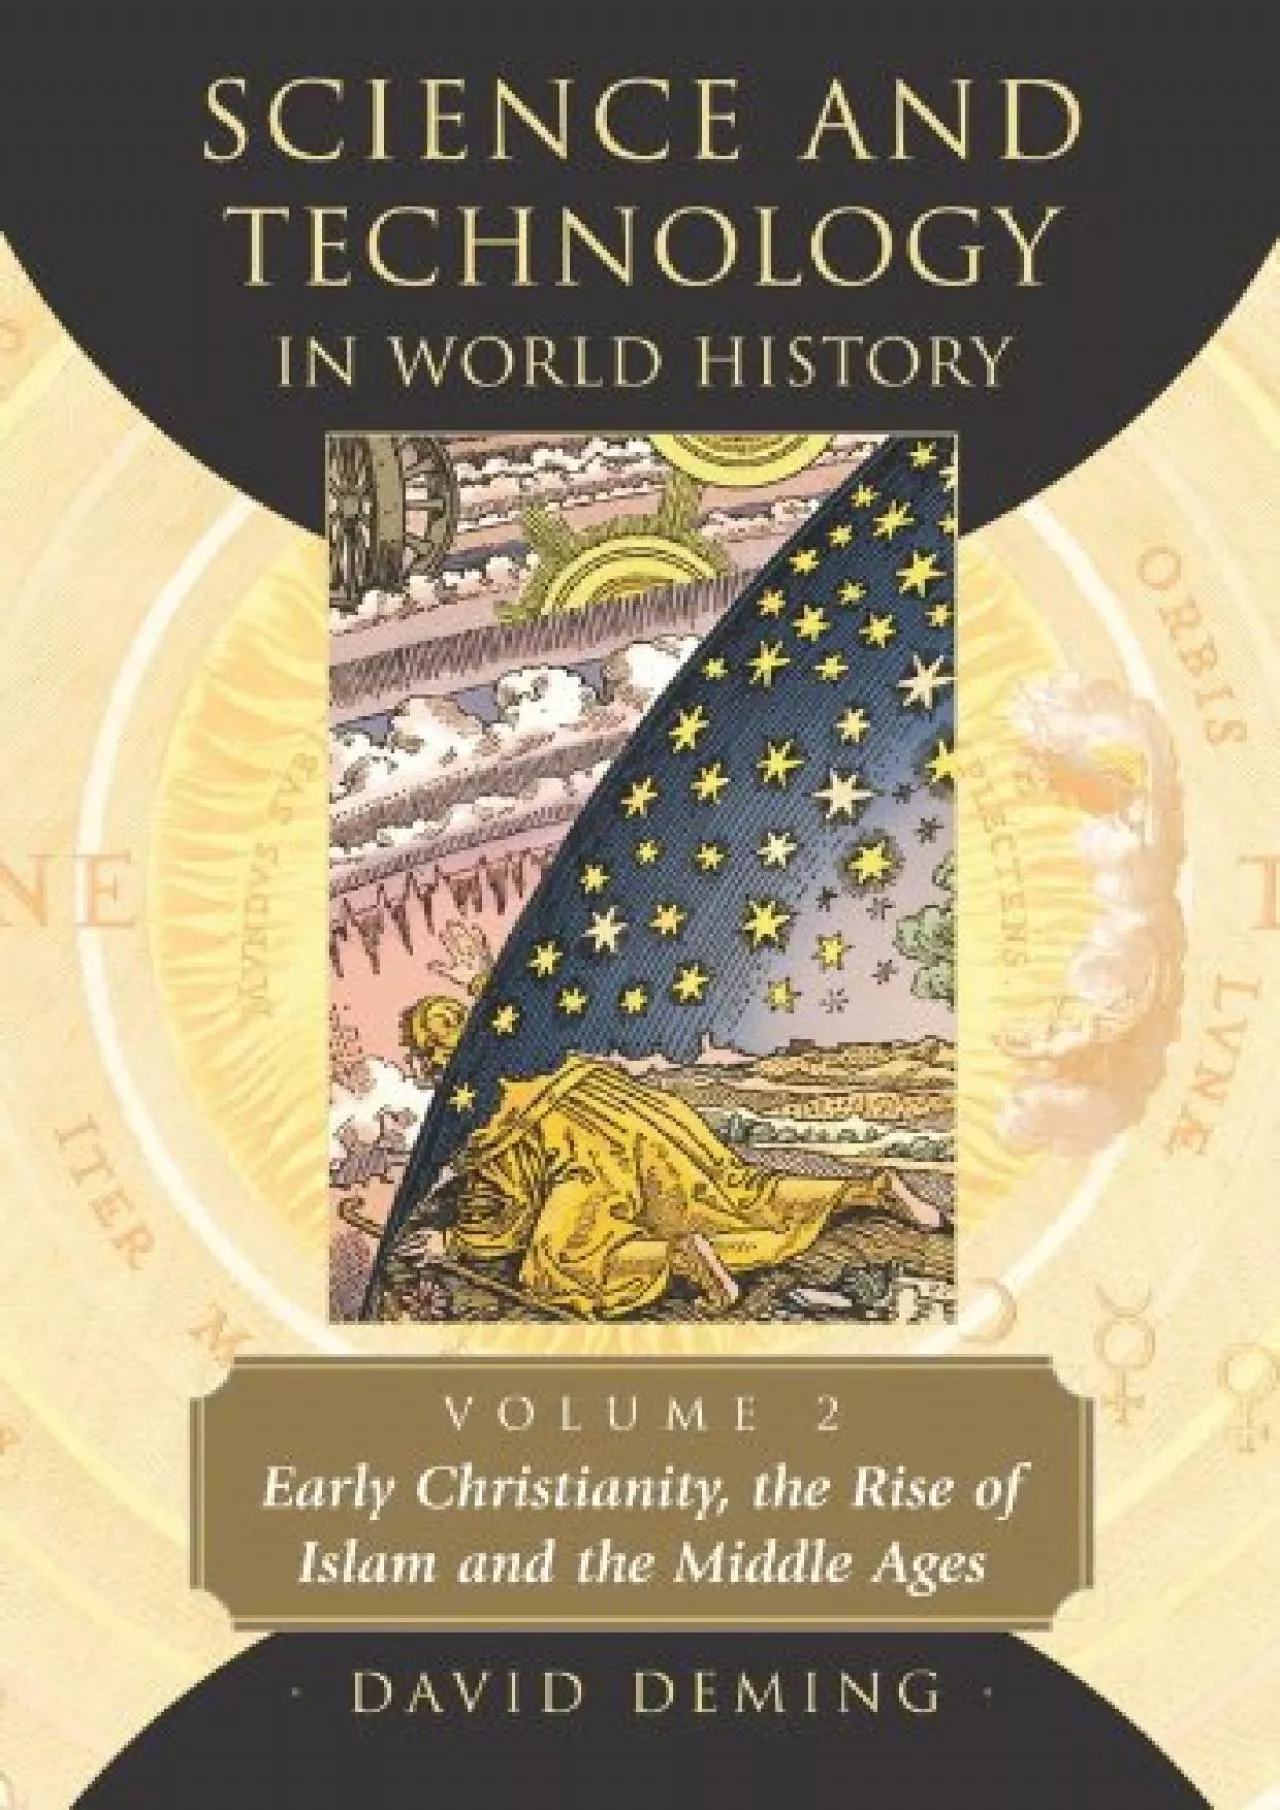 [EBOOK]-Science and Technology in World History, Volume 2: Early Christianity, the Rise